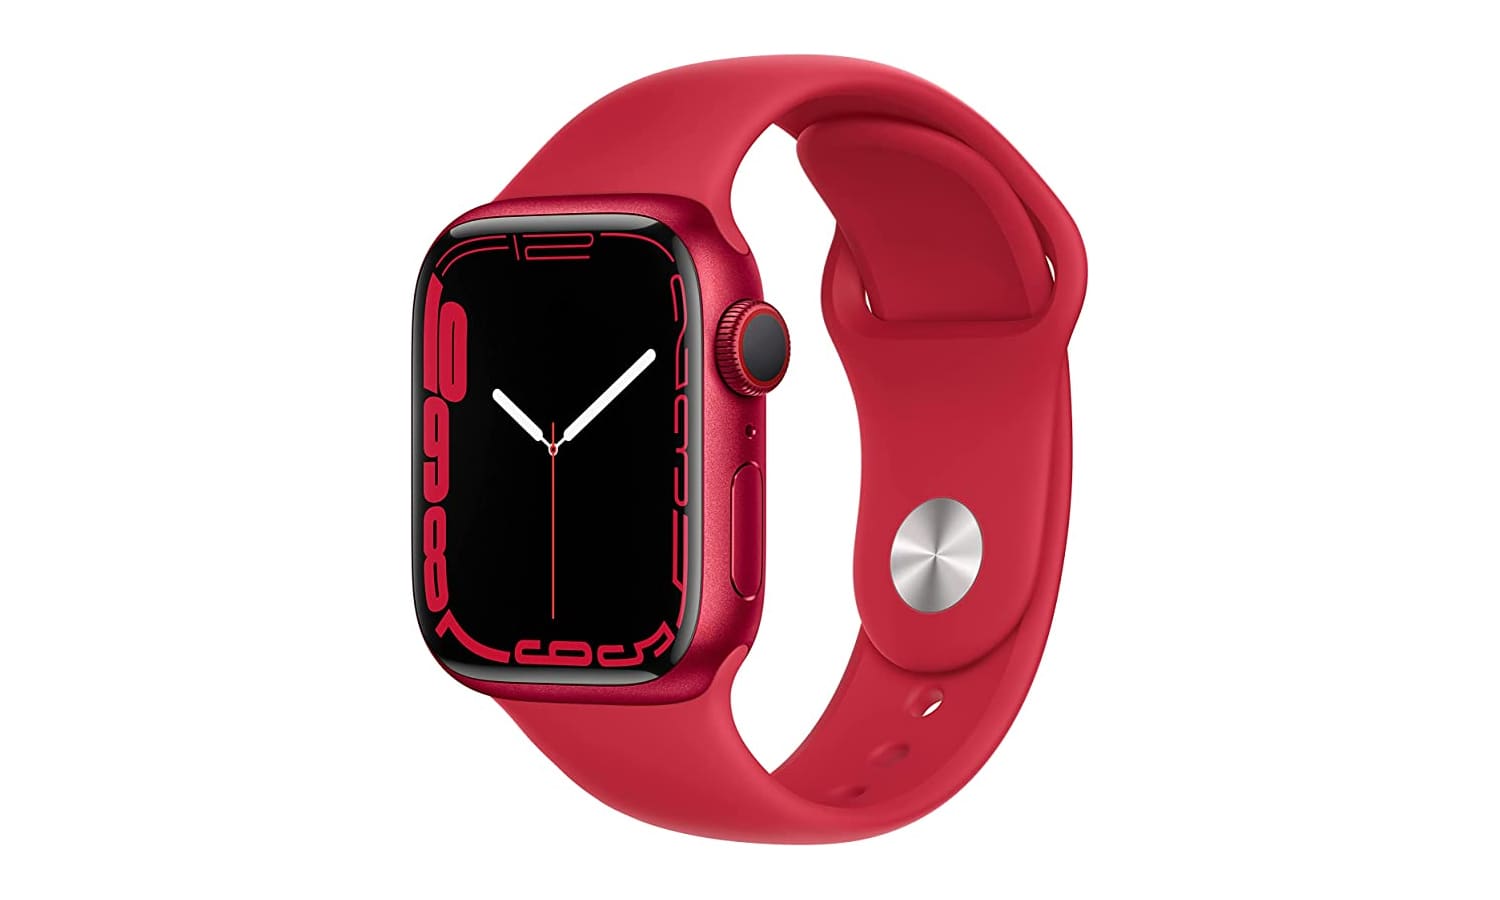 Apple Watch Series 7 with Red Aluminium Case and Red Sport Band.